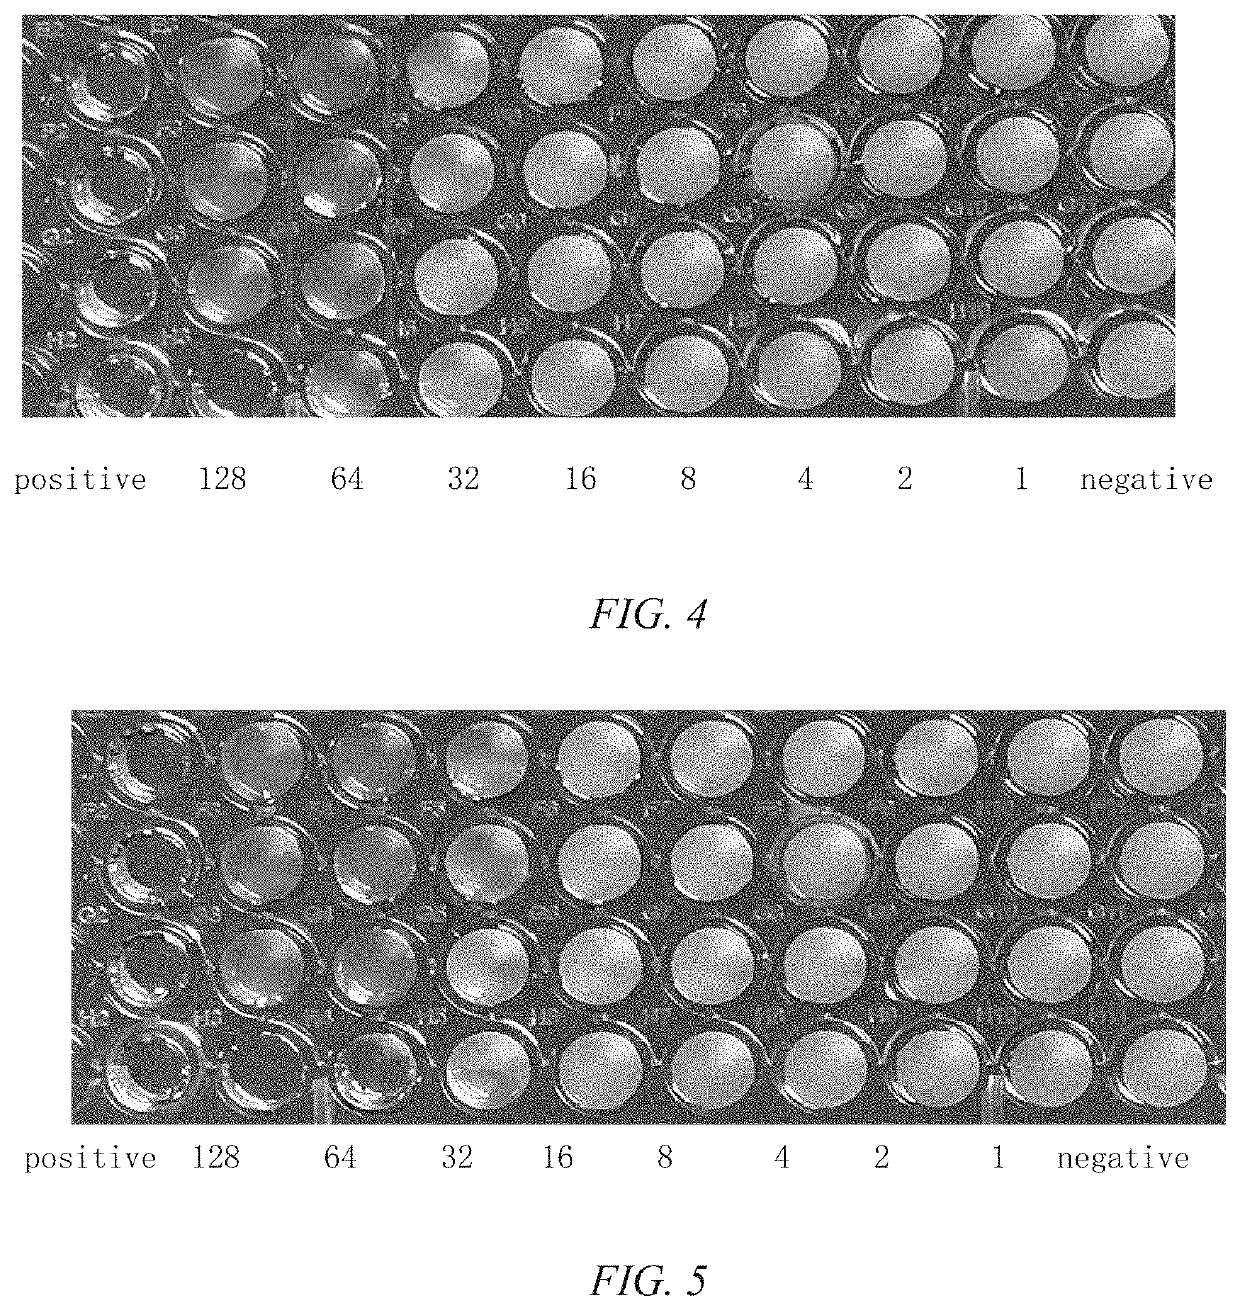 Pleuromulin rhein ester with anti-drug resistant bacteria activity and a method of preparing the same